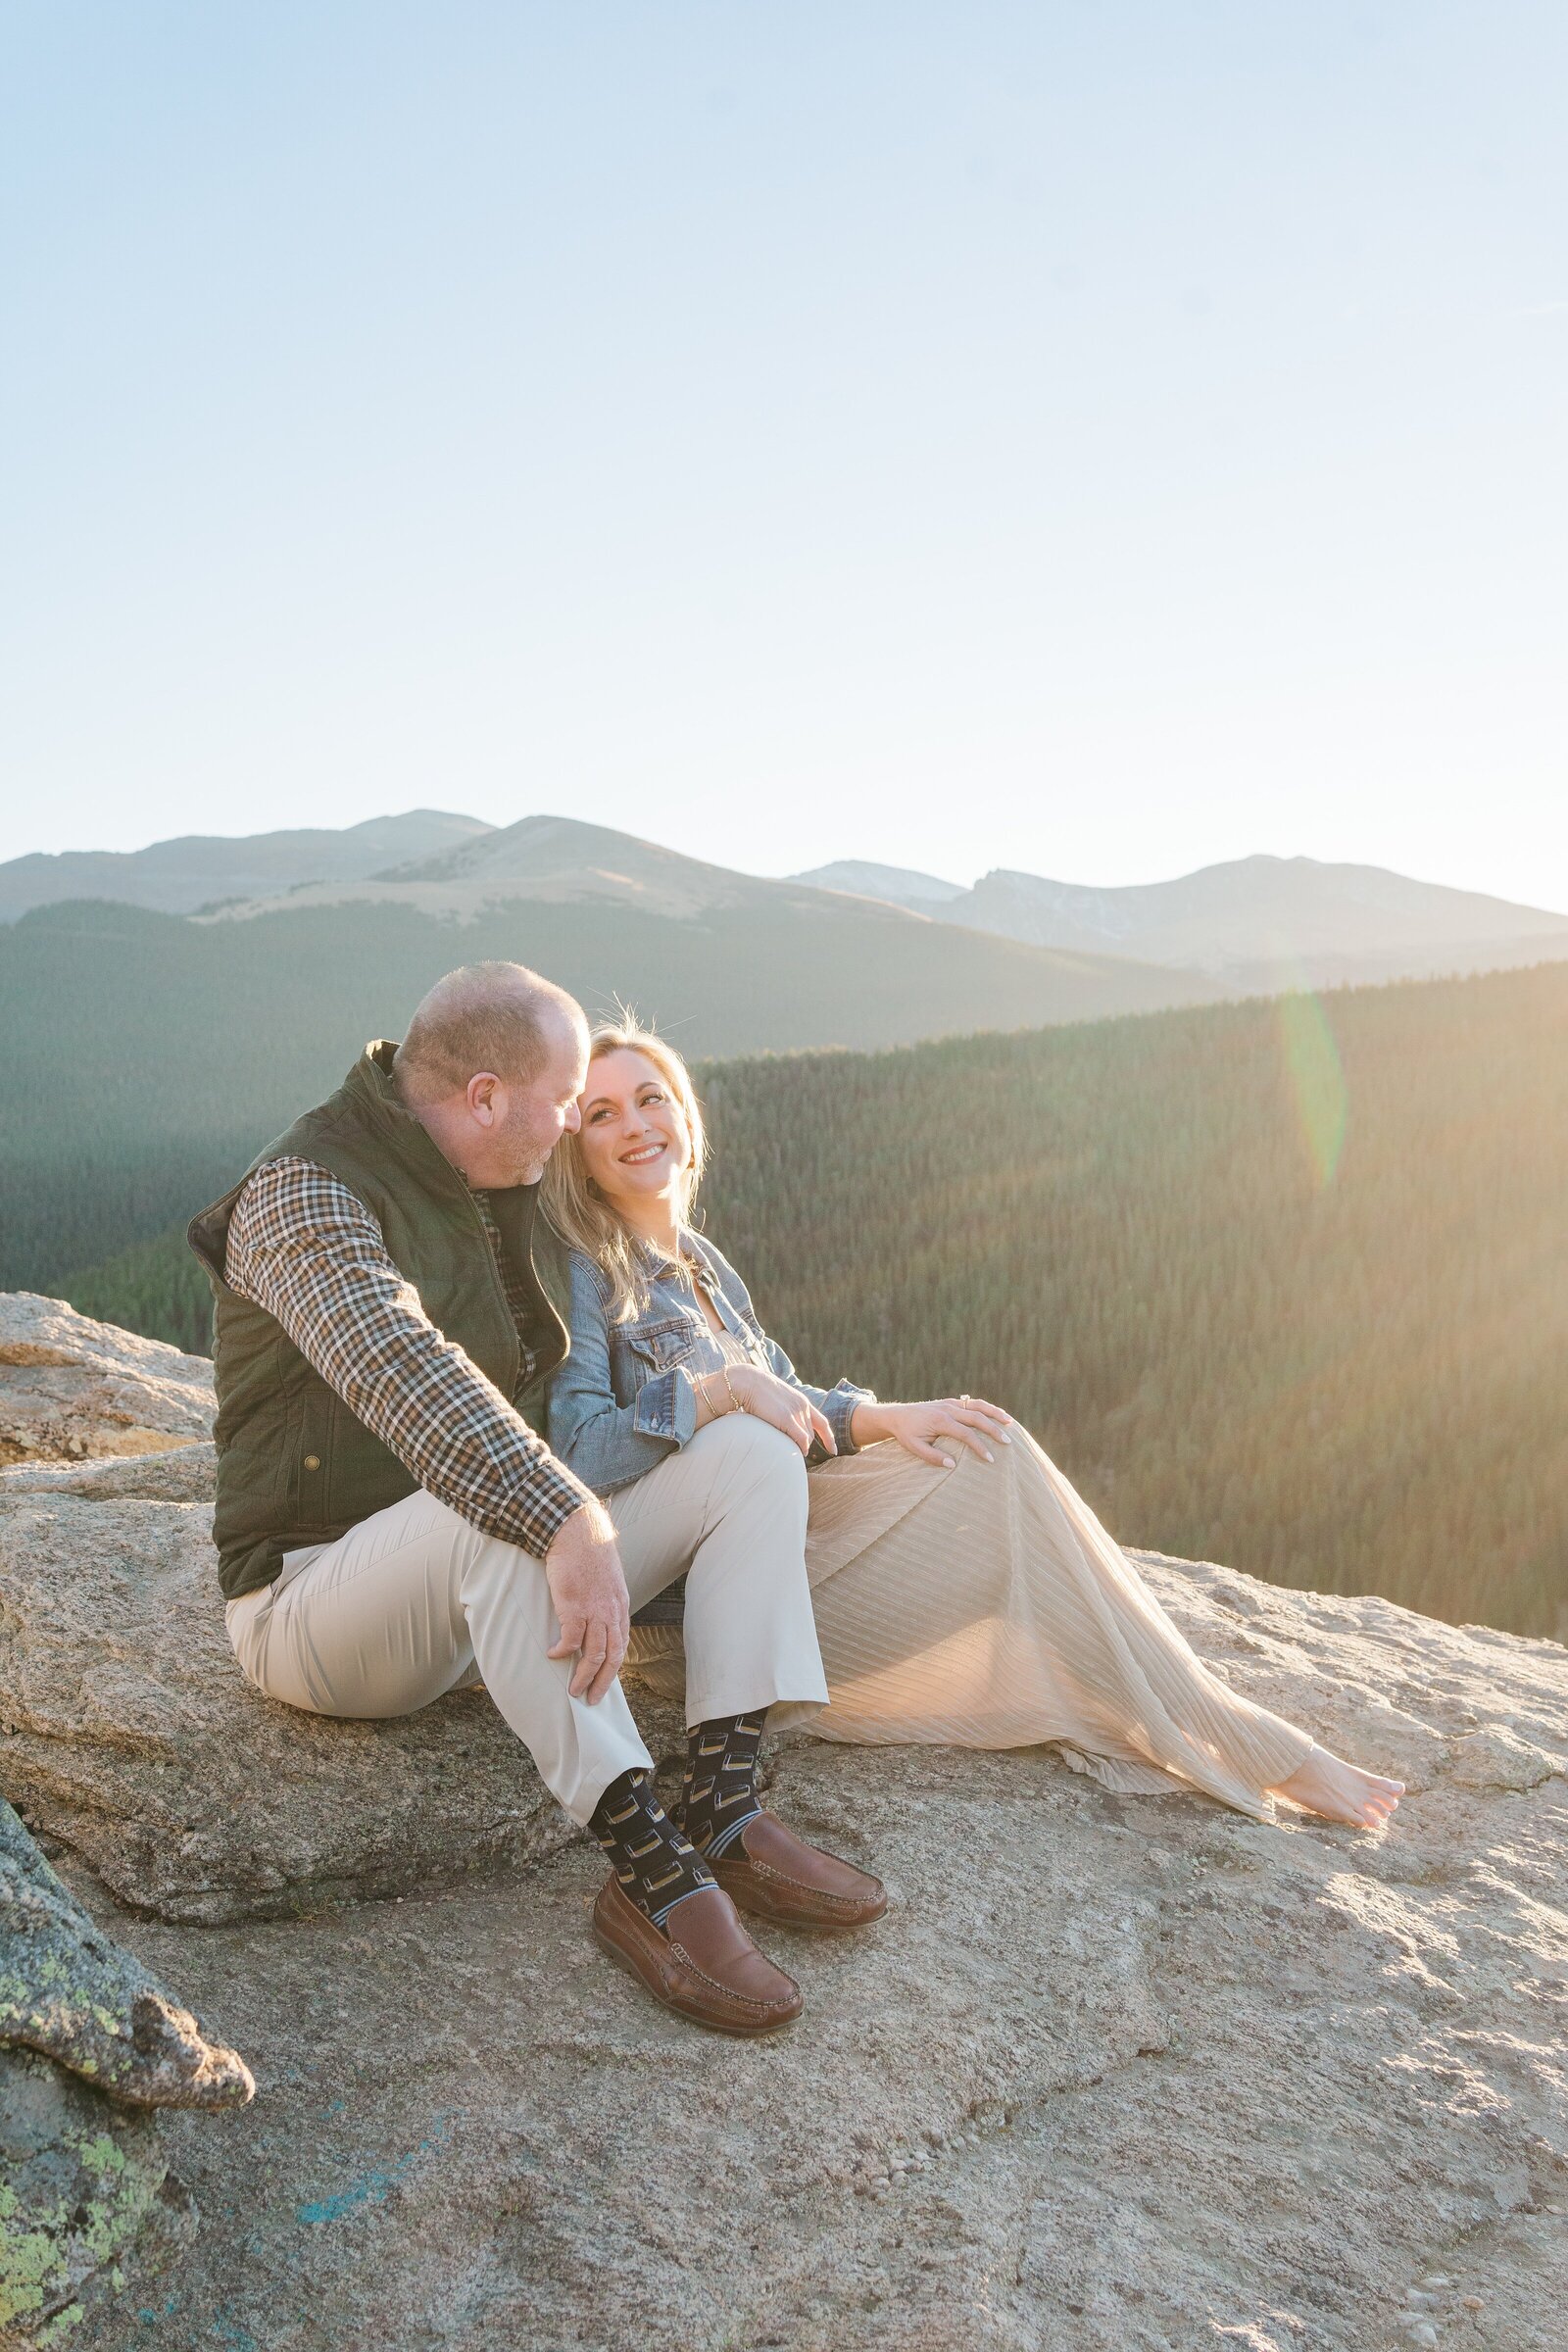 Experience the thrill and beauty of Colorado's outdoors with Sam Immer Photography's adventure photography services, capturing stunning moments with natural light and breathtaking backdrops.